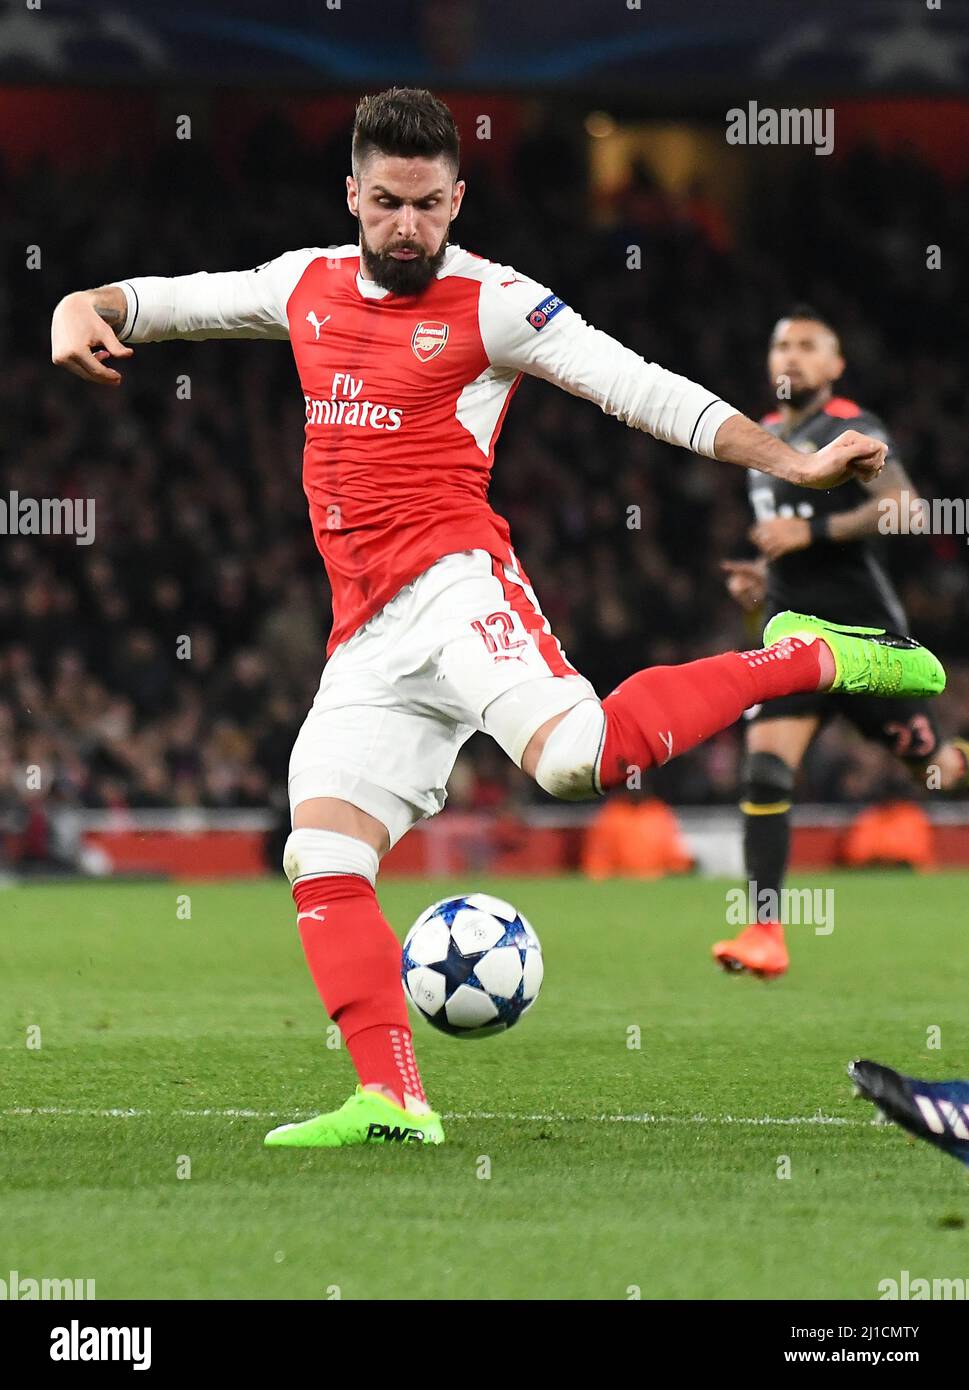 LONDON, ENGLAND - MARCH 7, 2017: Olivier Giroud of Arsenal pictured in action during the second leg of the UEFA Champions League Round of 16 game between Arsenal FC and Bayern Munchen at Emirates Stadium. Copyright: Cosmin Iftode/Picstaff Stock Photo